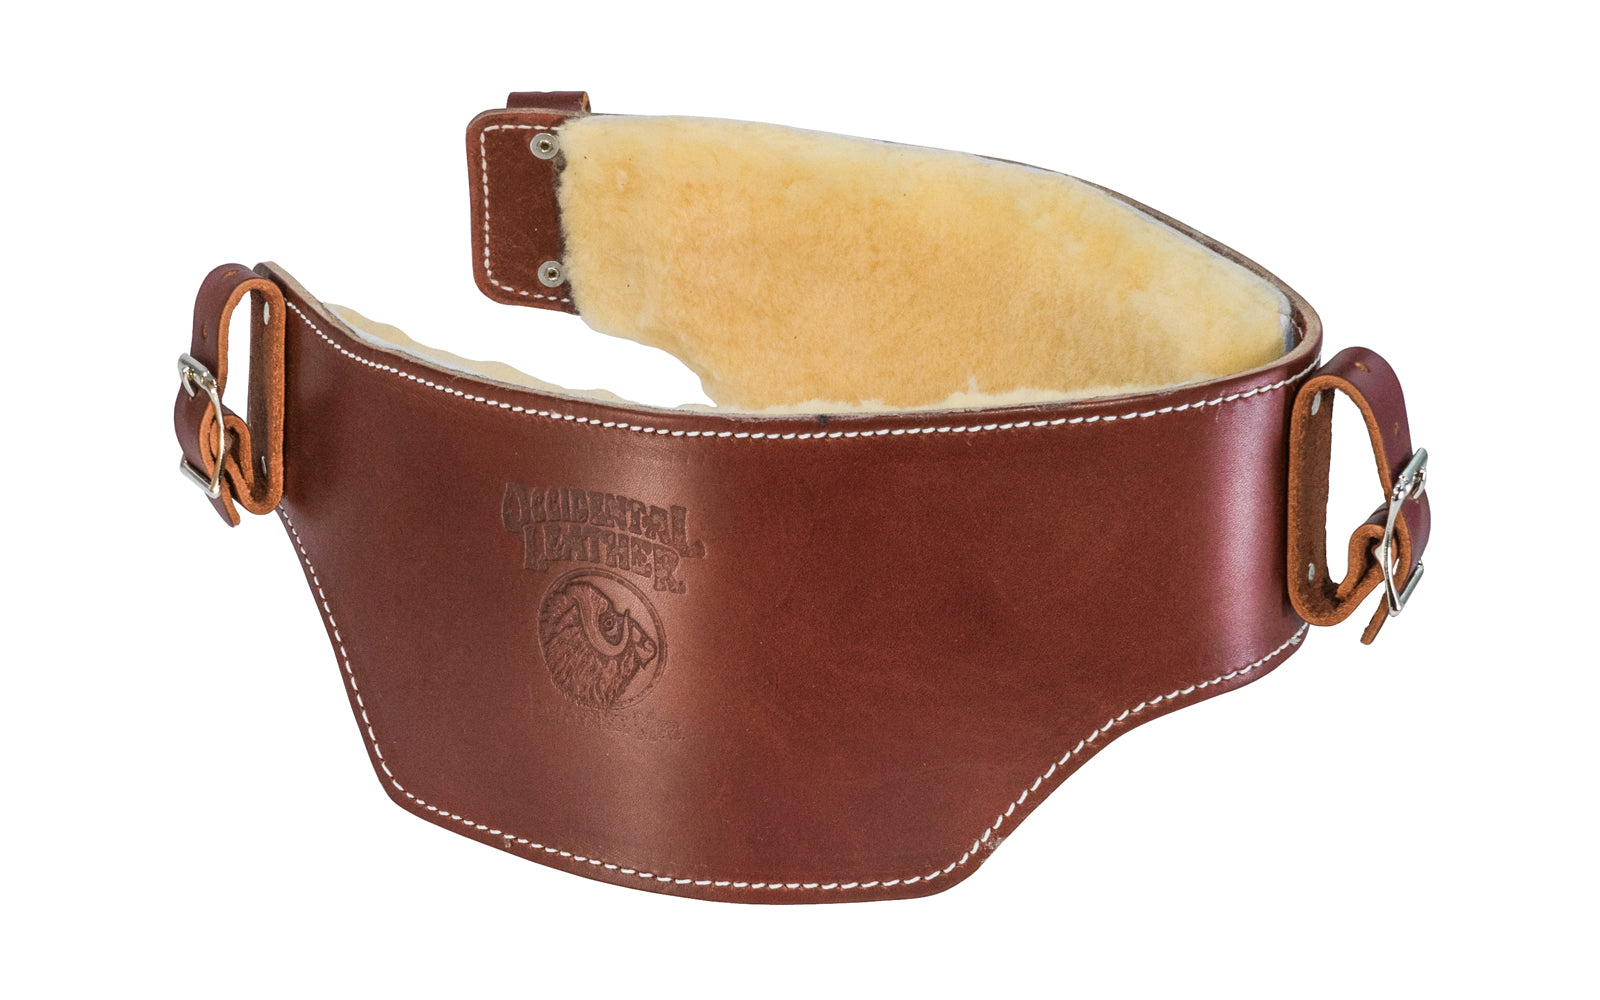 Occidental Leather's Belt Liner with Sheepskin relieves you from cutting edges & circulation problems associated with safety & tool belts. Sheepskin pads provide maximum comfort & is a natural insulator, warm & comfortable in winter, & cool in summer. Comfortable when using with tool belts. Model 5005 S - Small Size - 759244004700